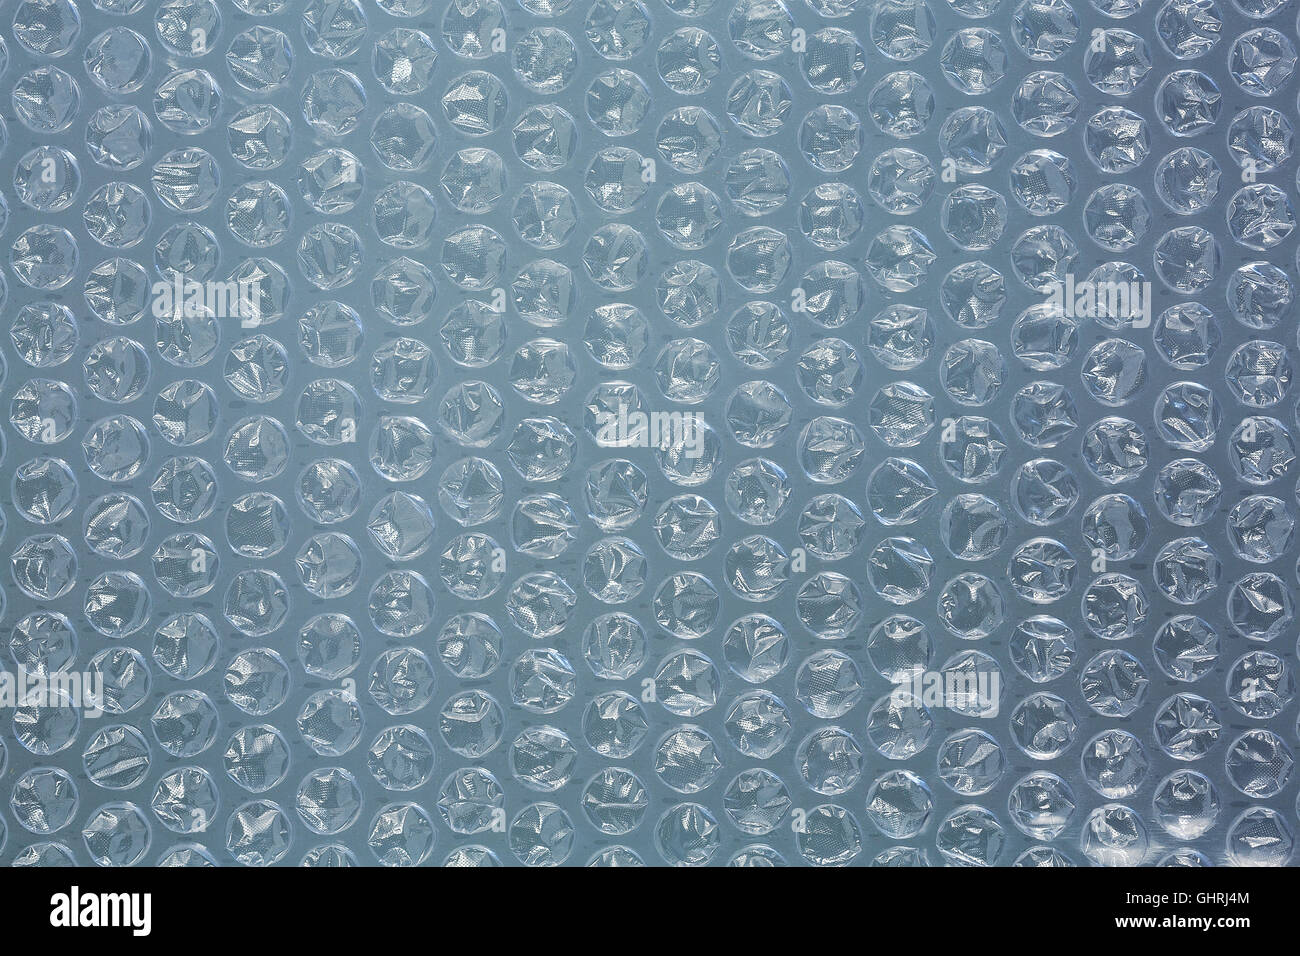 Large Bubble Wrap Backgrounds Stock Photo - Download Image Now